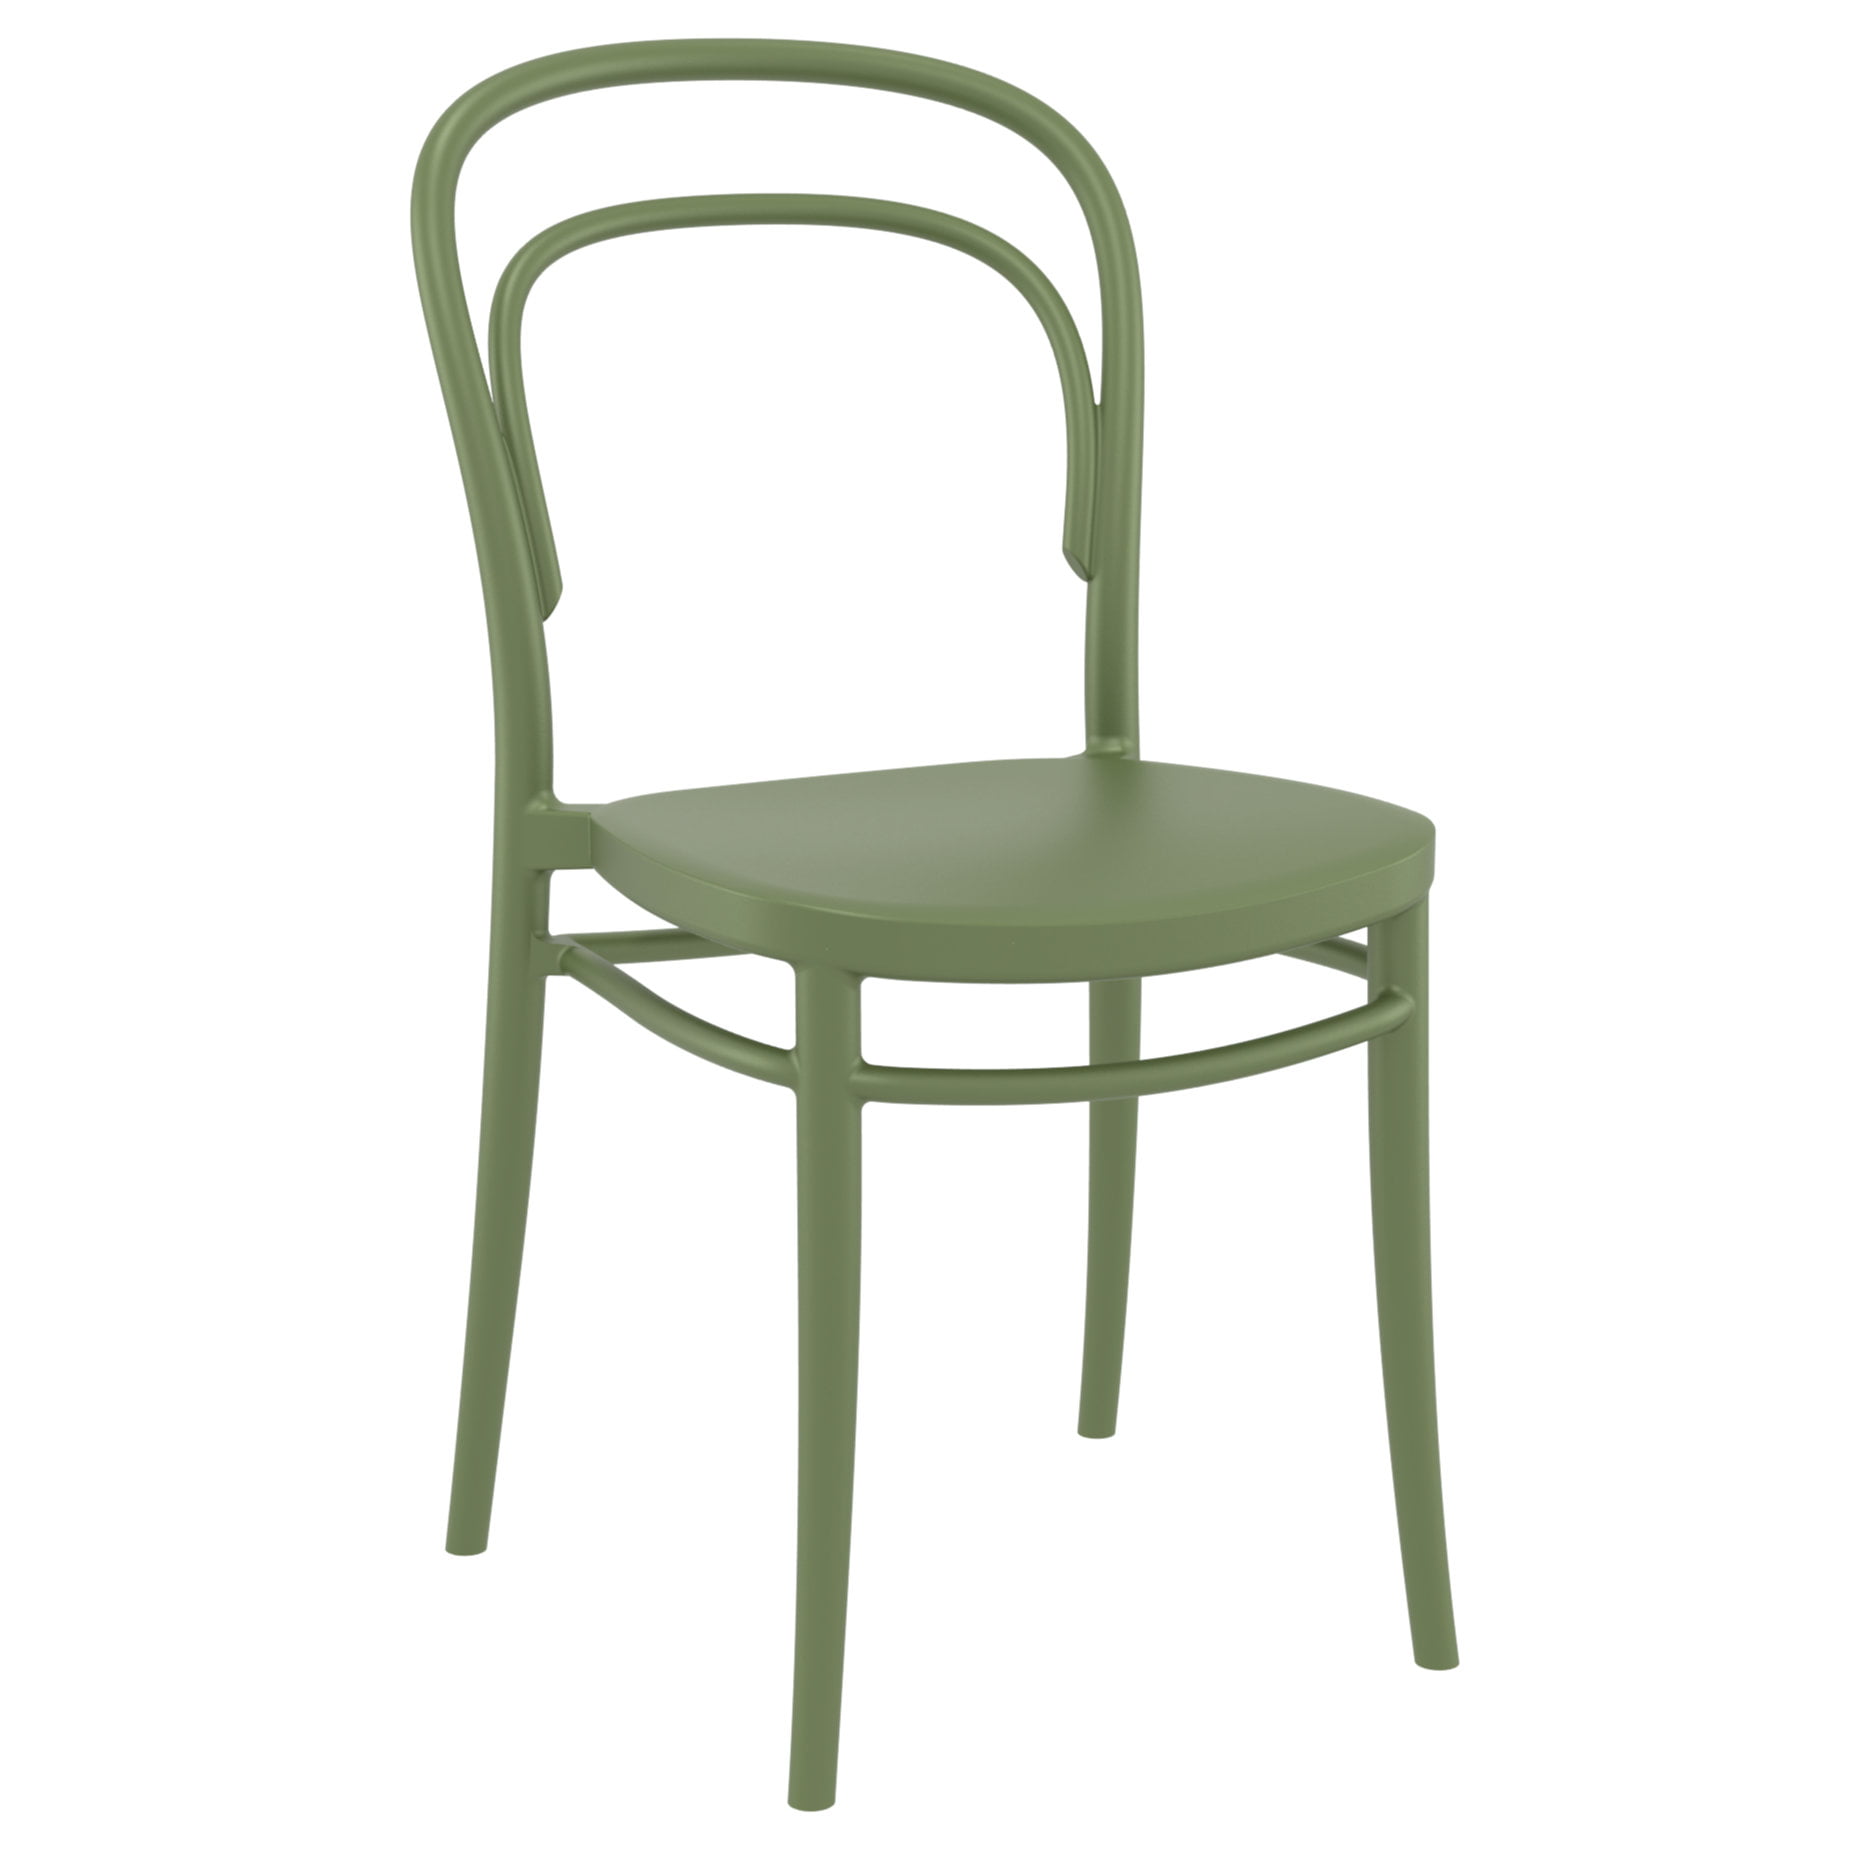 Isp251-olg Marie Resin Outdoor Chair, Olive Green